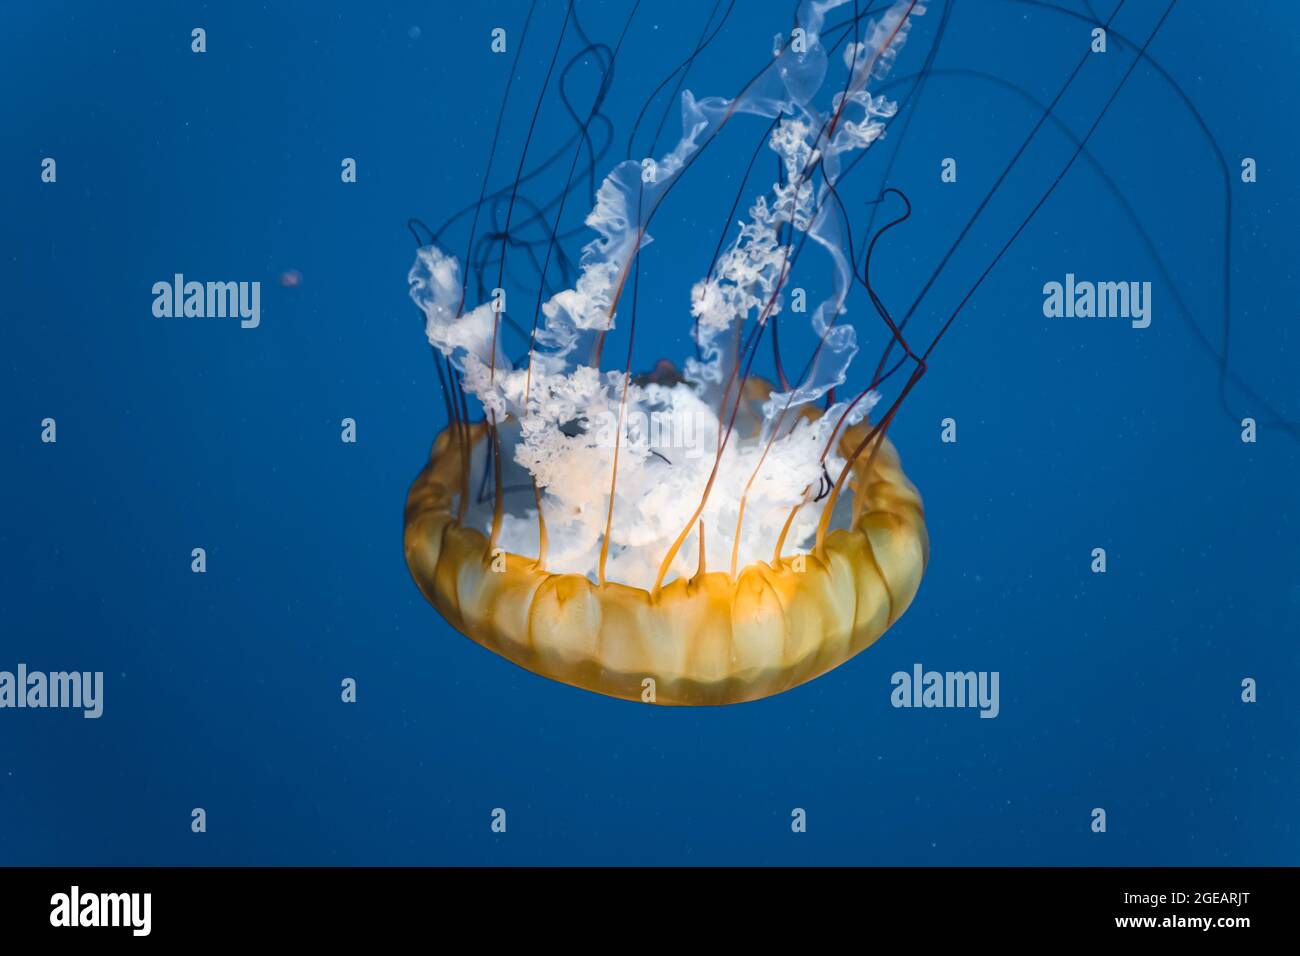 Pacific Sea Nettle jellyfish floating gracefully against a deep blue background. Stock Photo